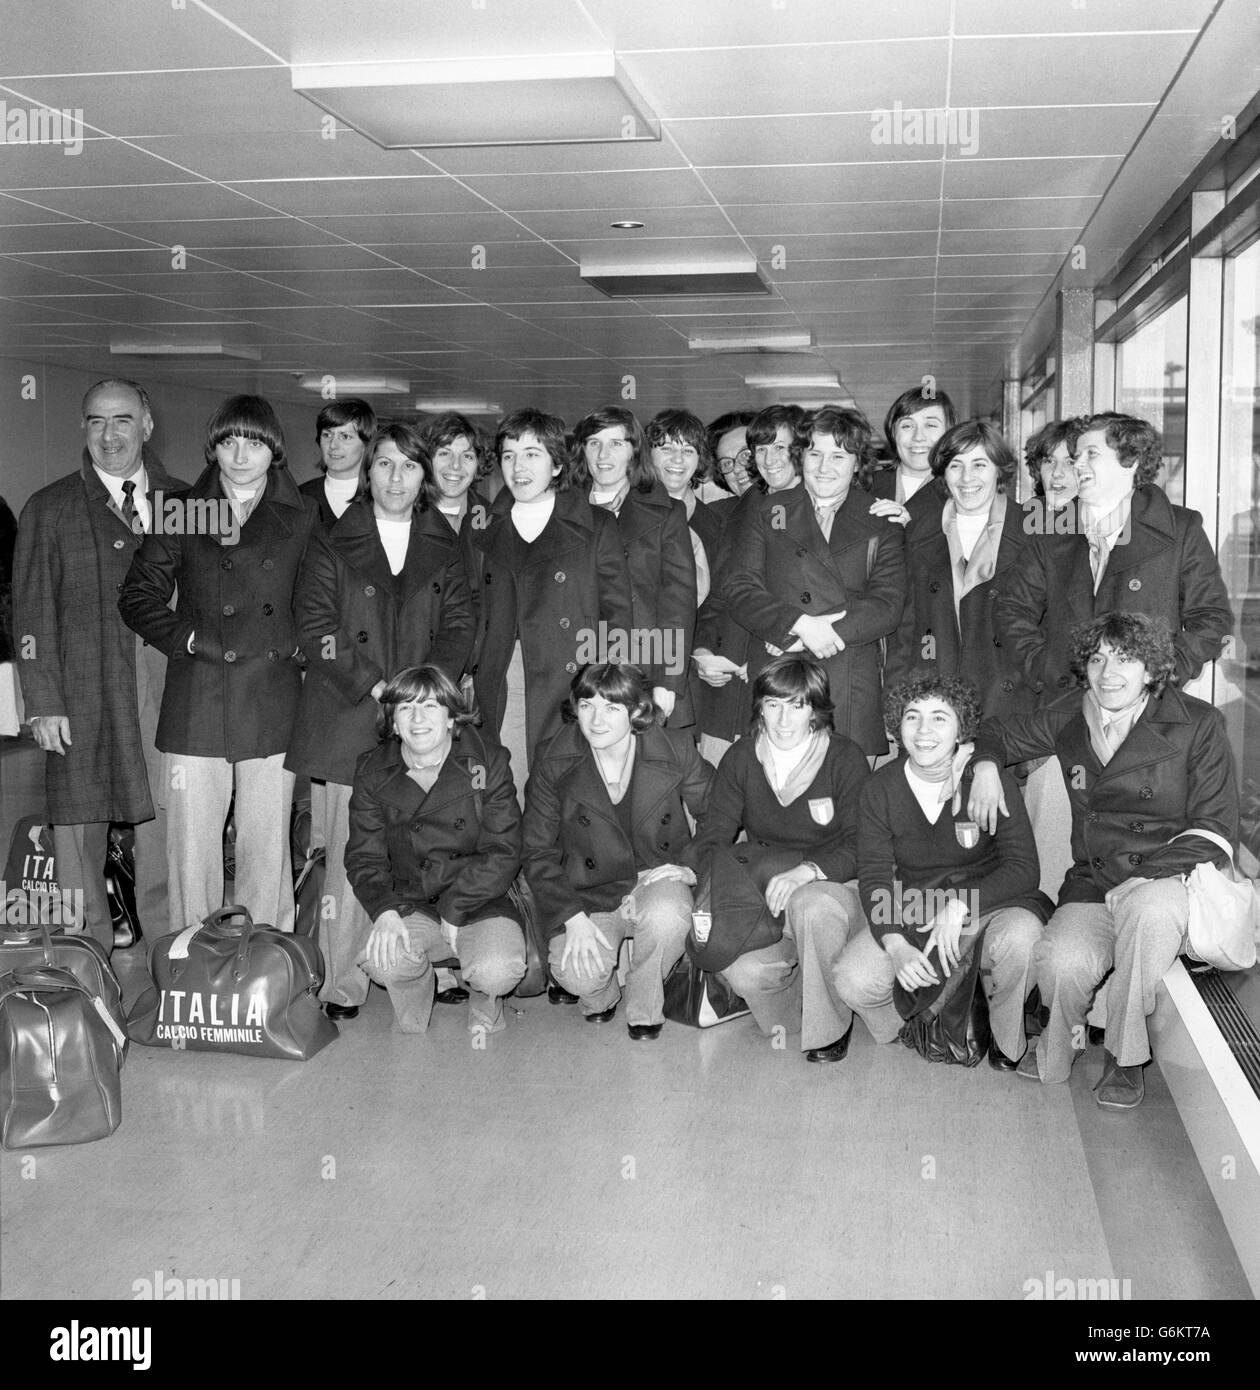 The Italian women's football team, with coach Amadeo Amadei, at Heathrow Airport after flying in from Rome. They are due to play England's women at Wimbledon. Stock Photo